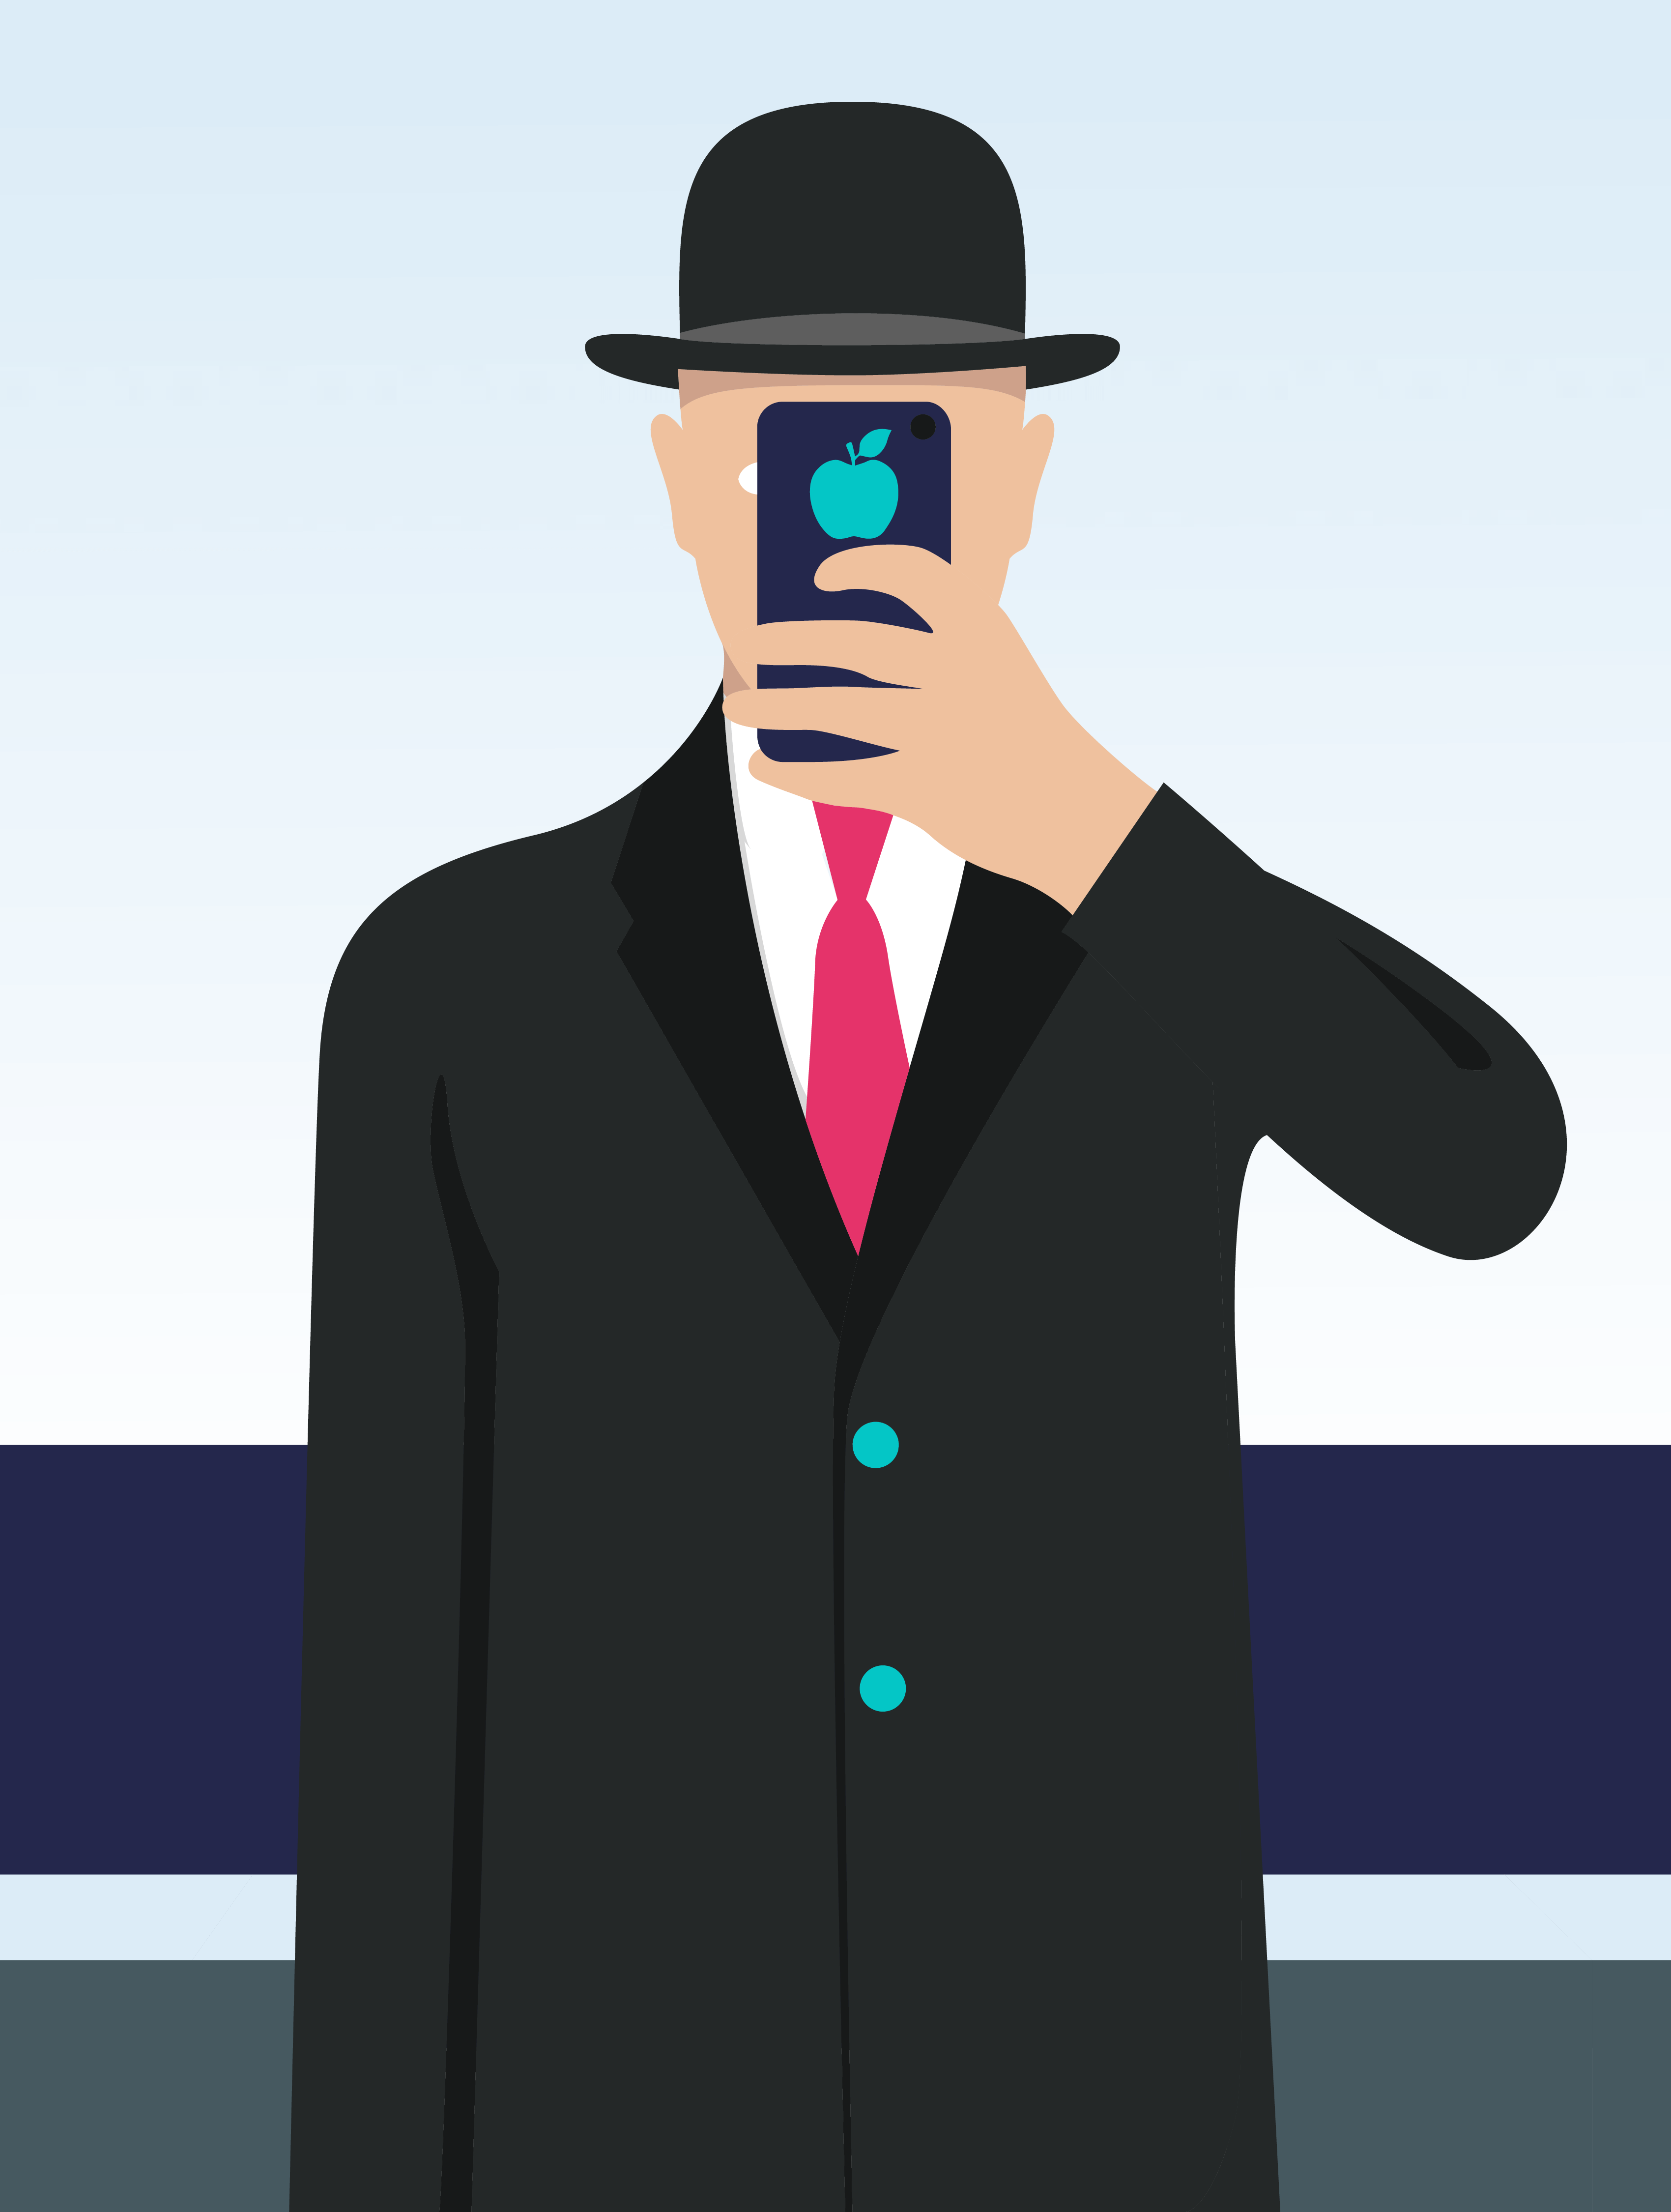 Minimalist vector art illustration of a man holding an iphone in front of his face resembling the famous painting 'Son of Man' by René Magritte by digital artist Baz Grafton.